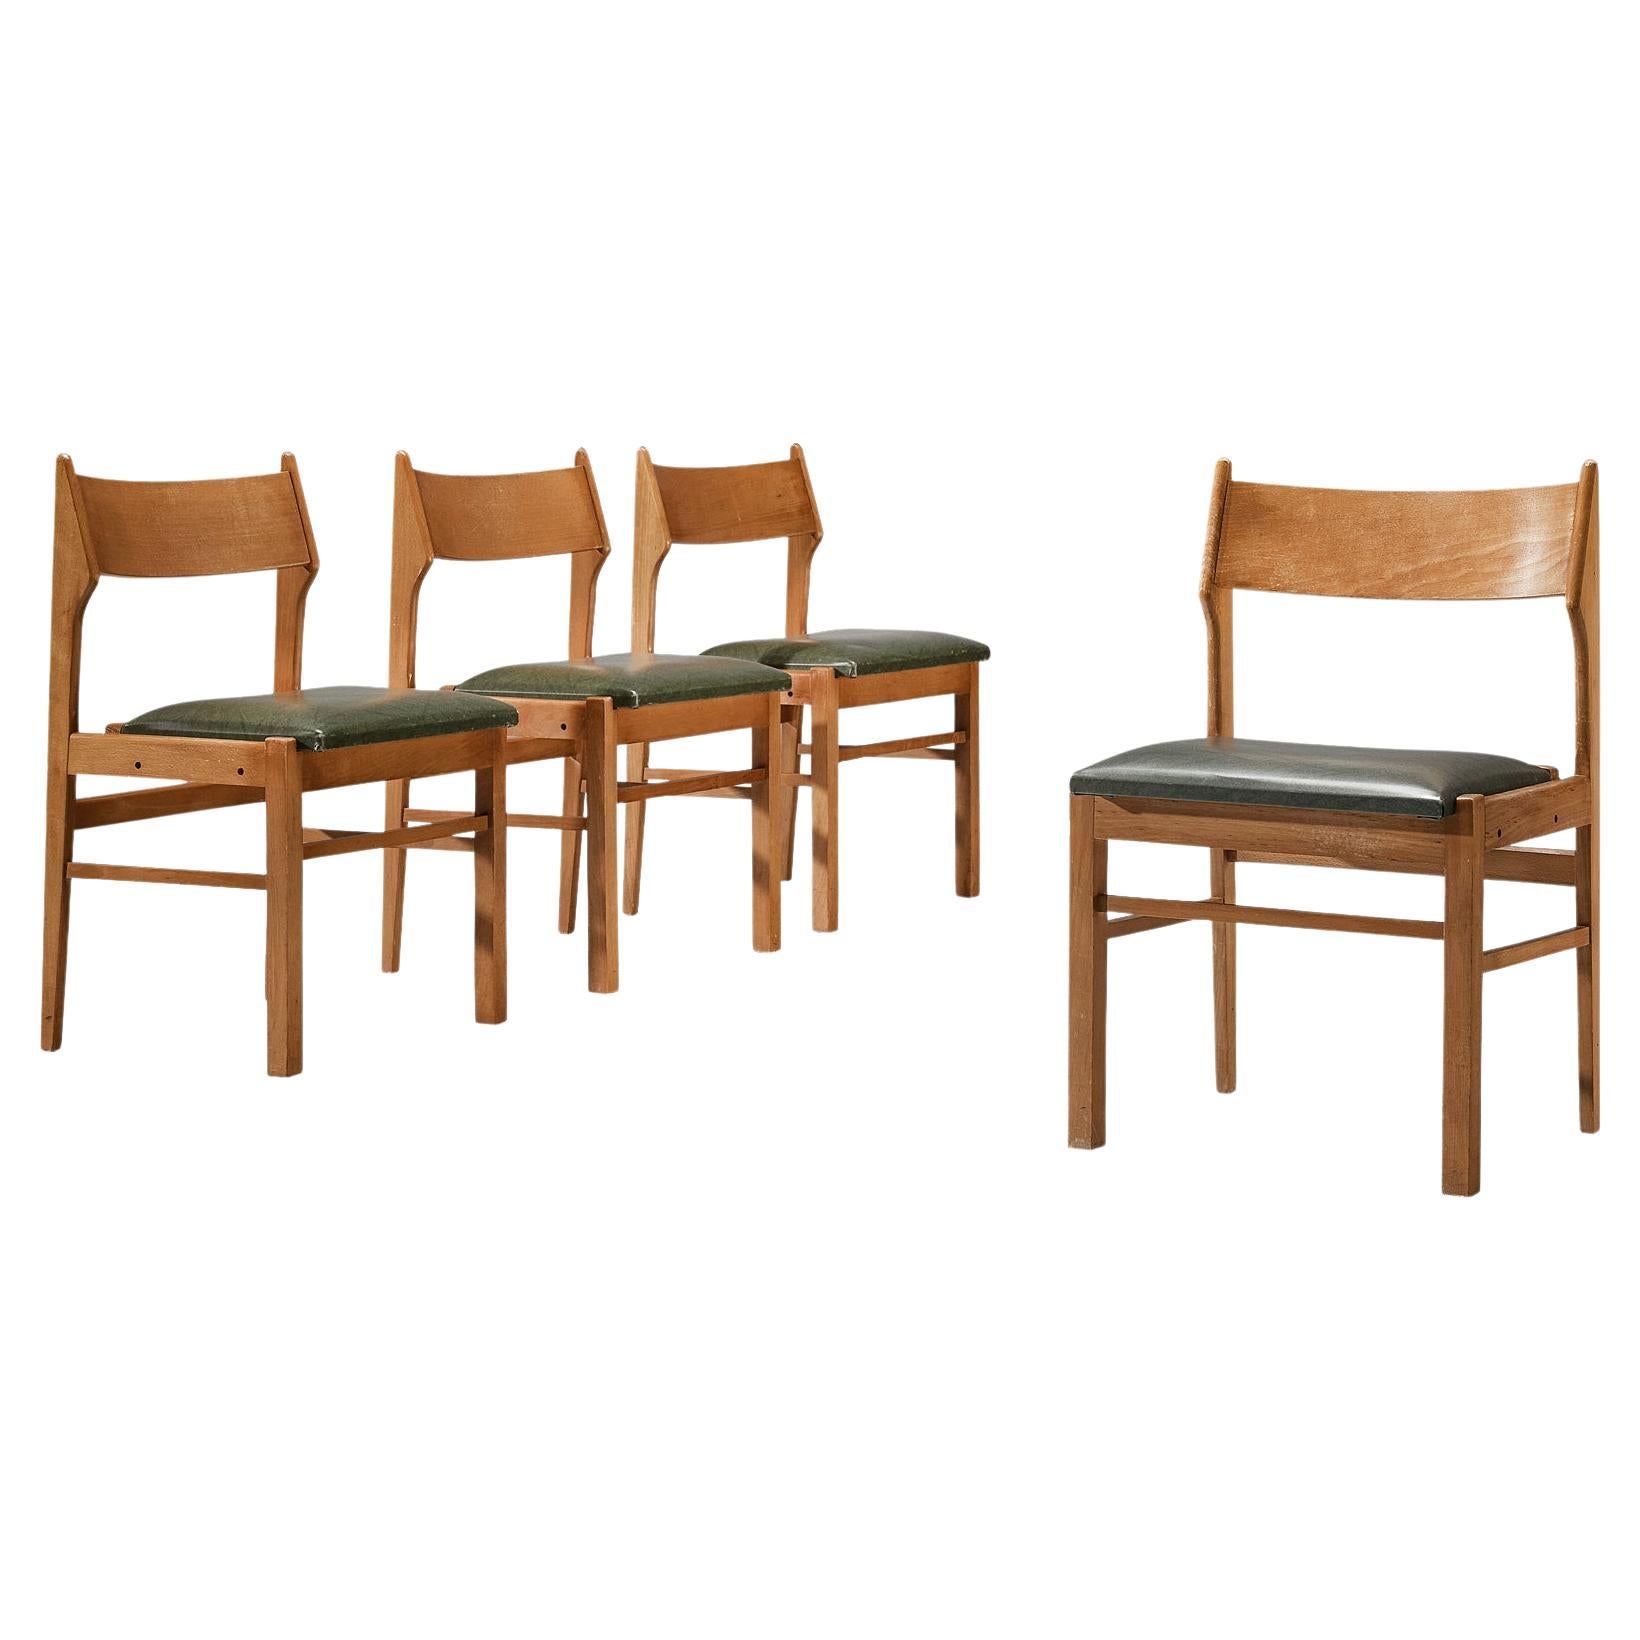 Dutch Dining Chairs in Wood and Green Leatherette